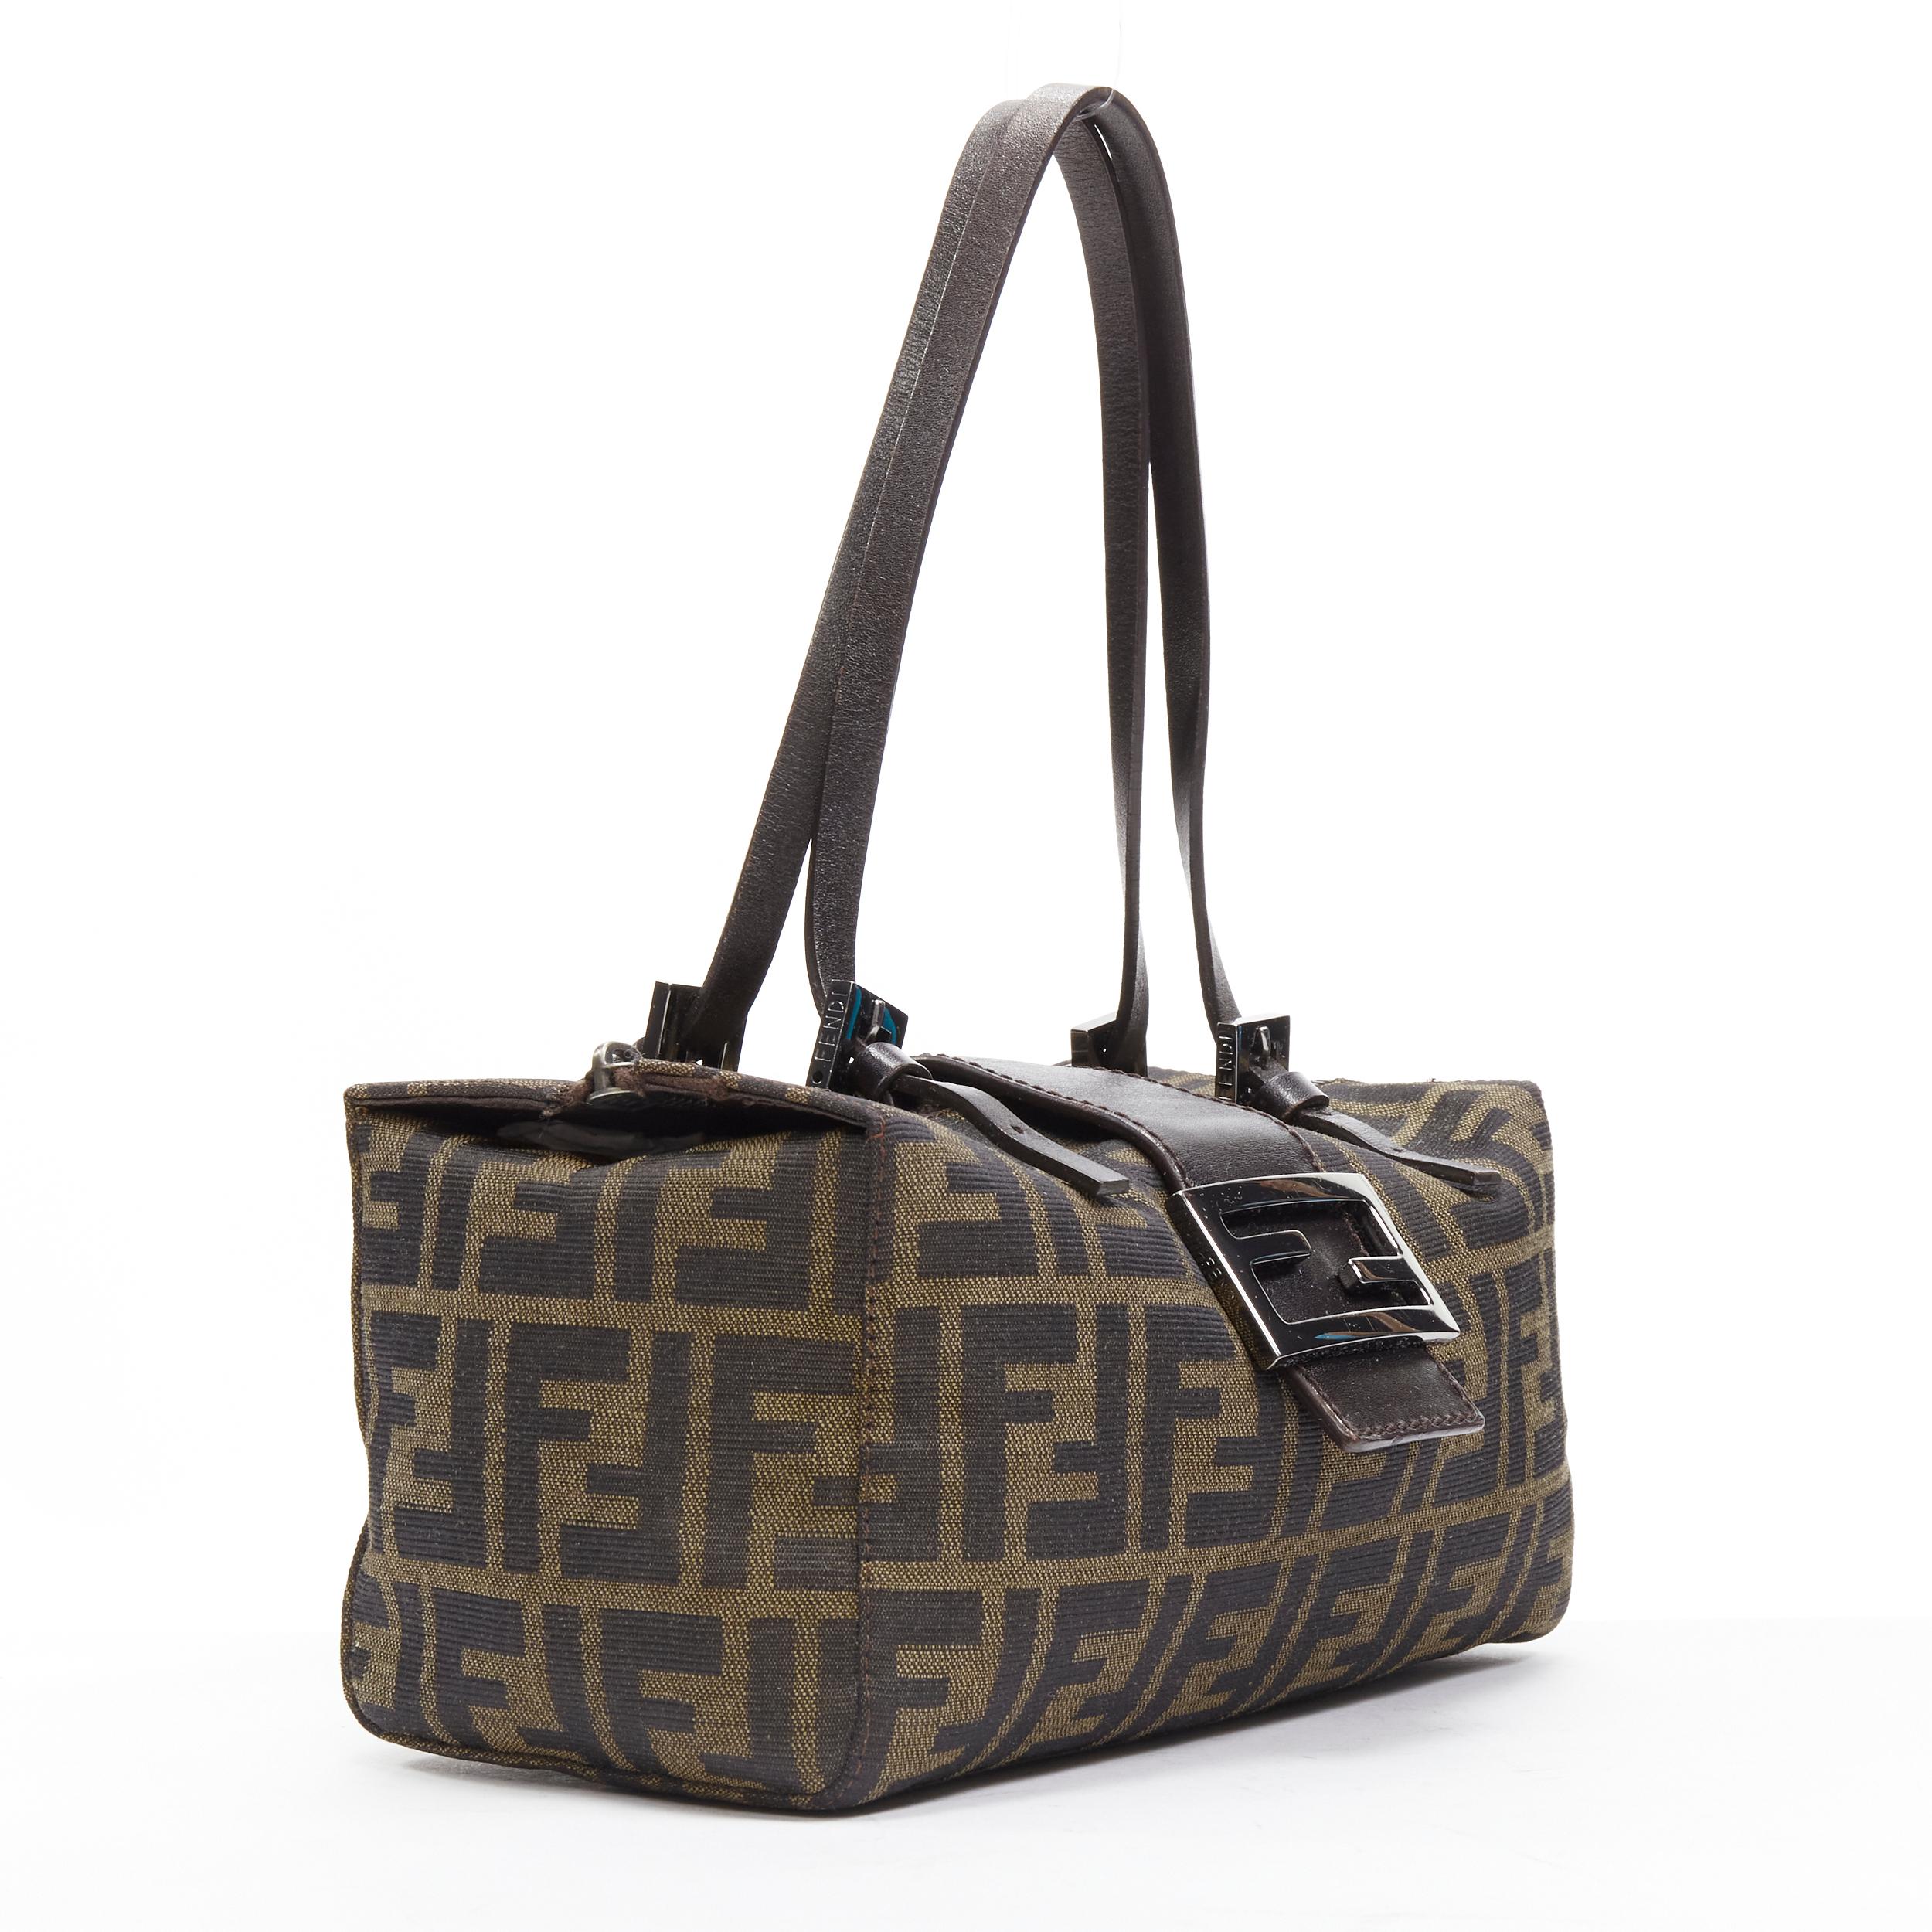 FENDI Vintage brown leather handle Zucca Monogram canvas mini cube boston bag
Reference: TGAS/D00238
Brand: Fendi
Collection: FF Zucca
Material: Fabric, Leather
Color: Khaki, Brown
Pattern: Logomania
Closure: Snap Buttons
Lining: Black Fabric
Made